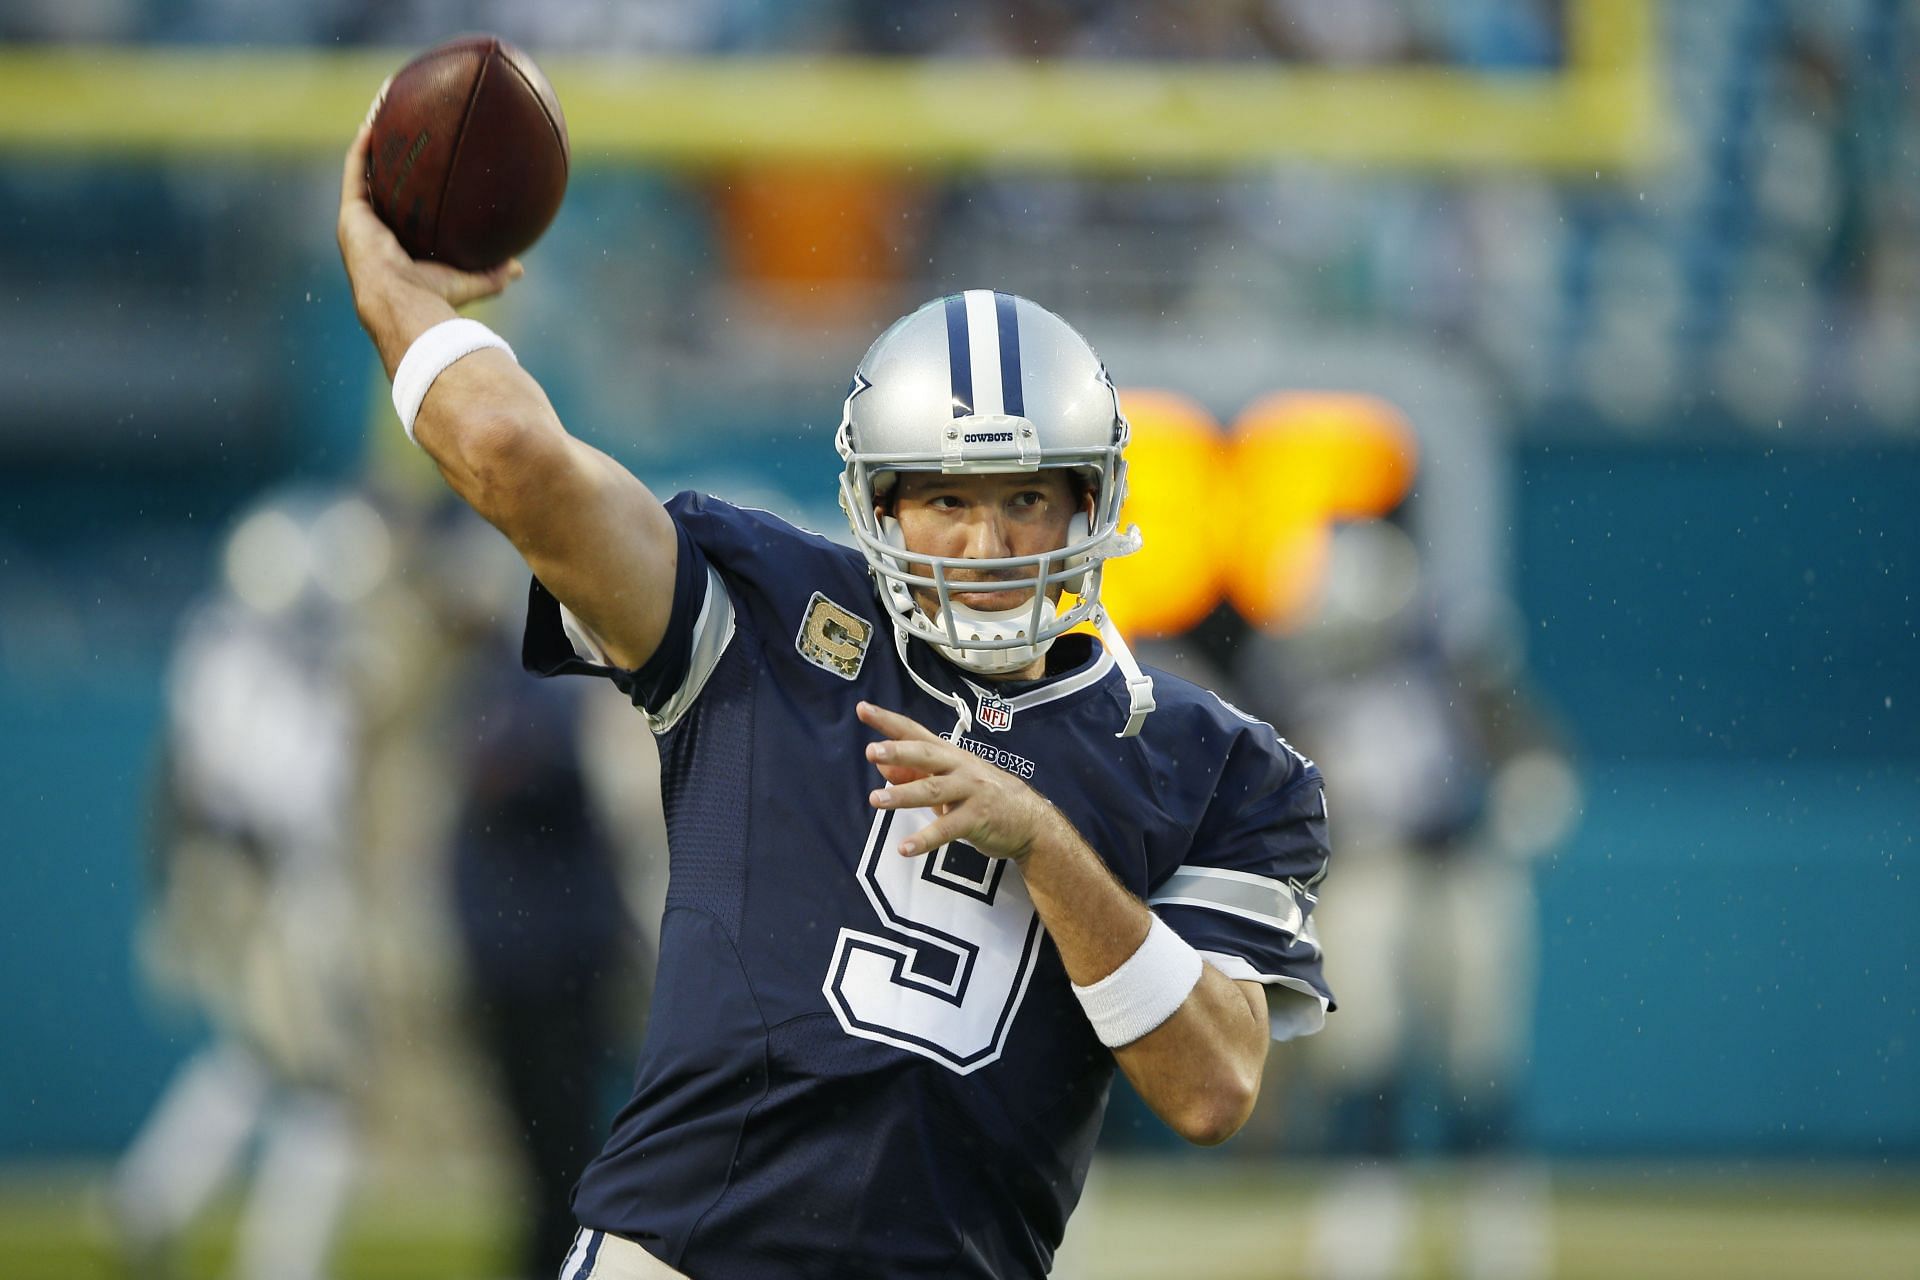 Tony Romo says he's striving to be the spiritual leader in his home -  Sports Spectrum